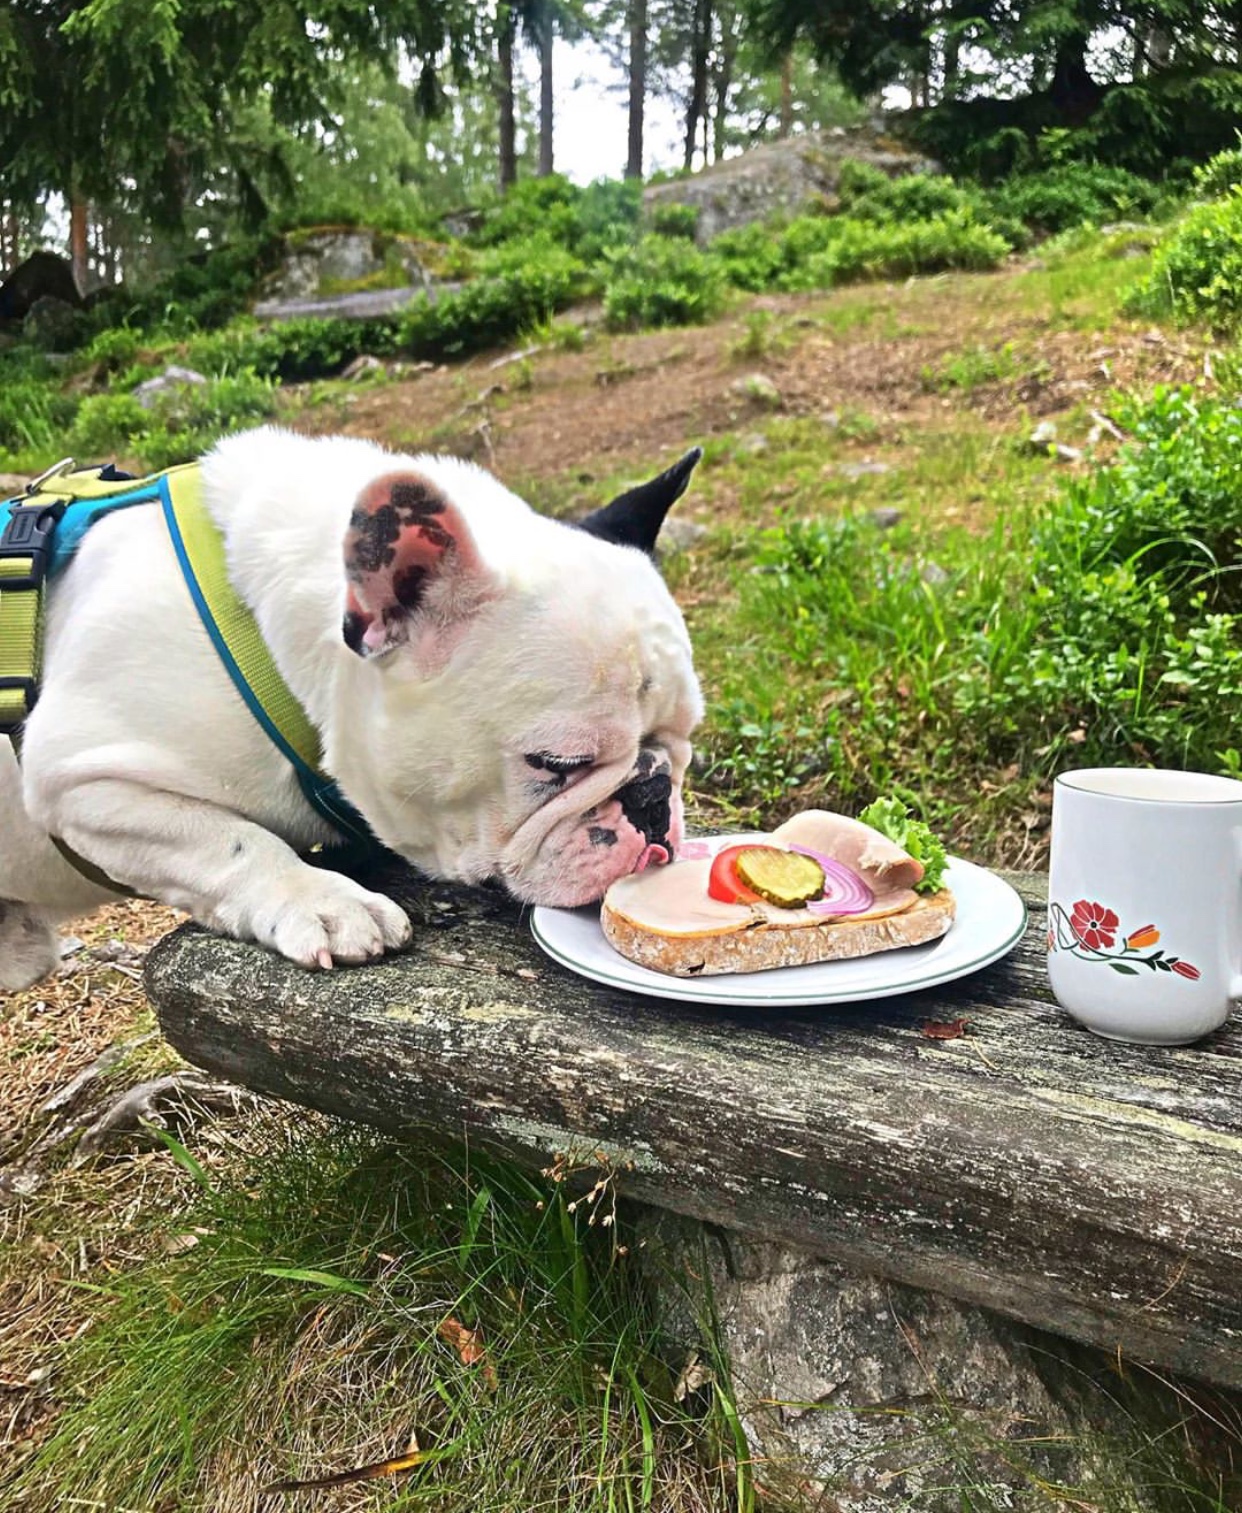 A French Bulldog licking the sandwich on top of the wooden bench in the forest